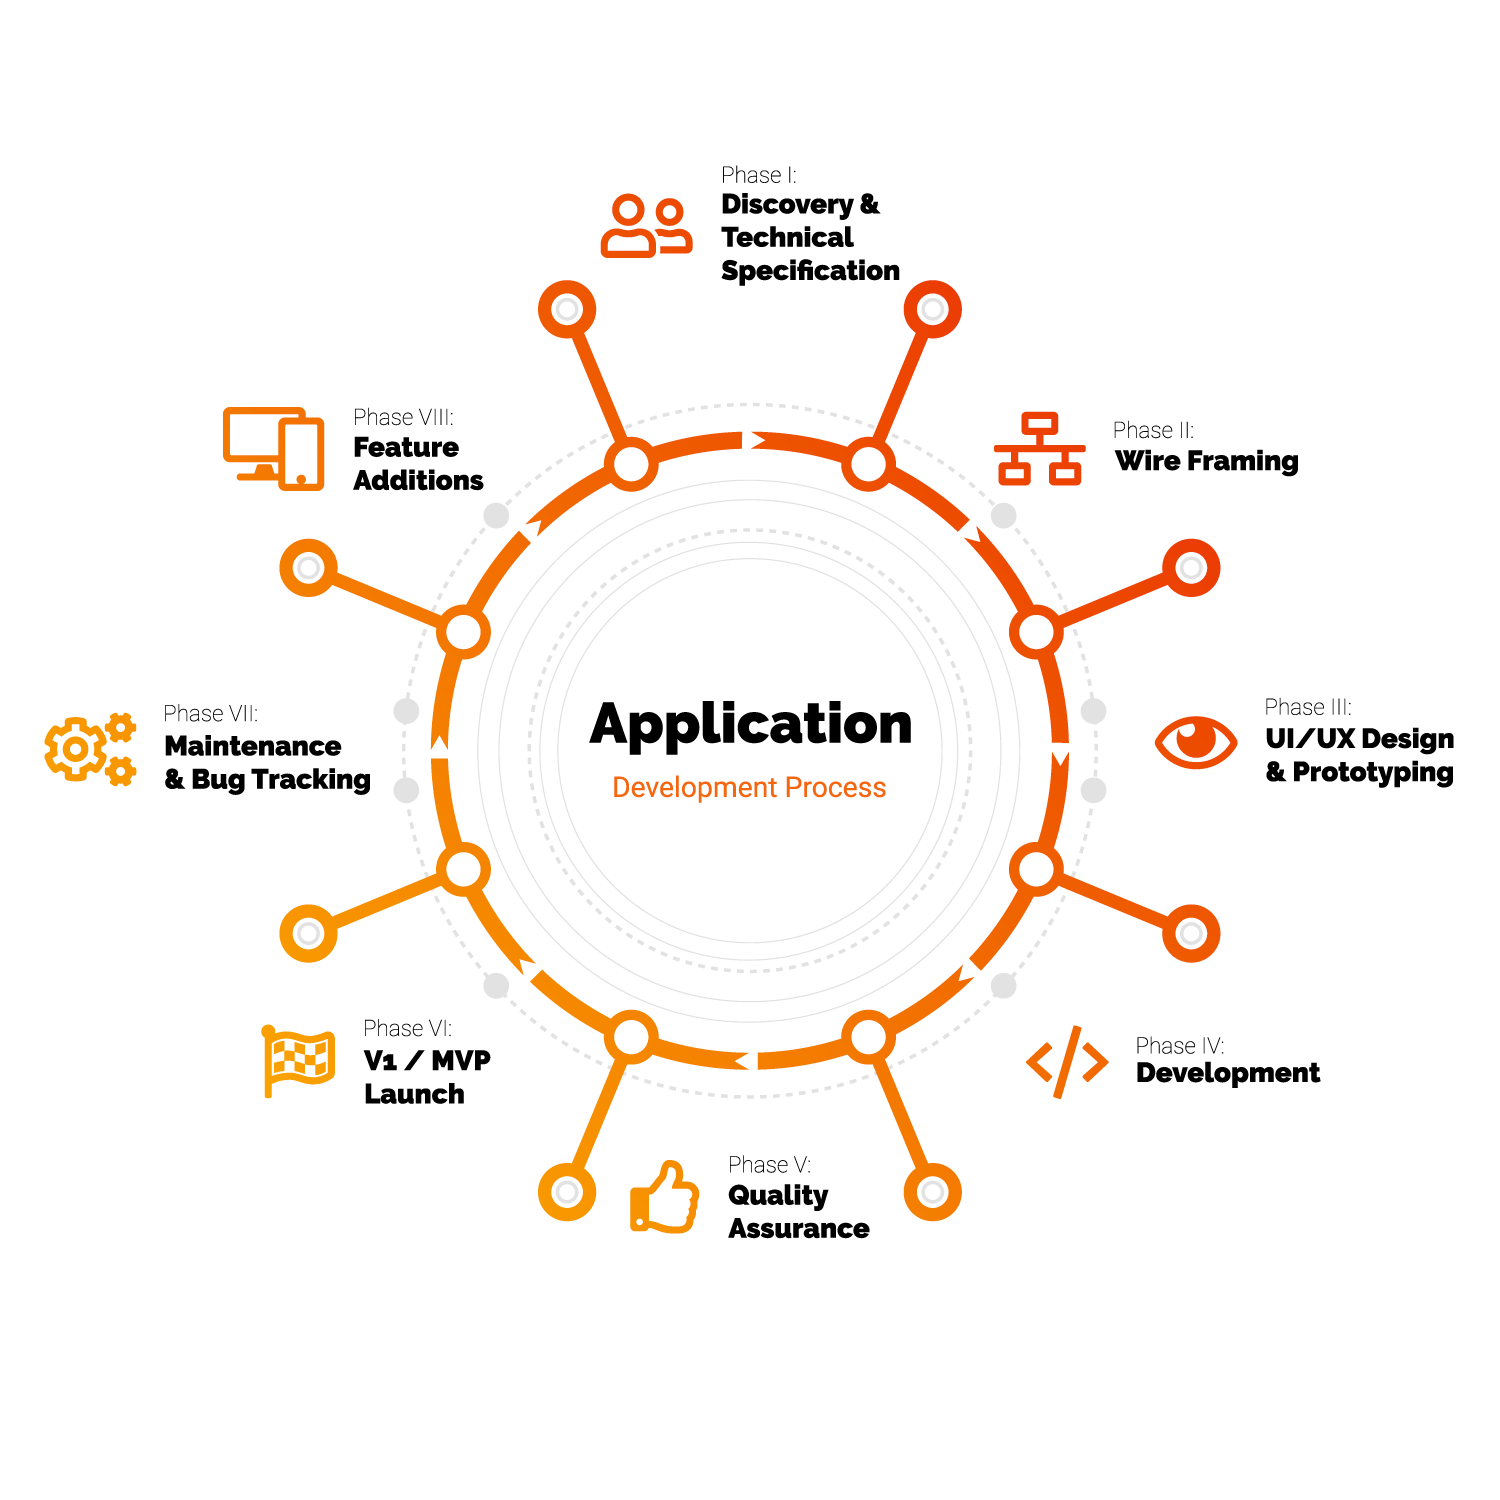 Fyresite's Application Development Process depicted in an 8-part circular graphic